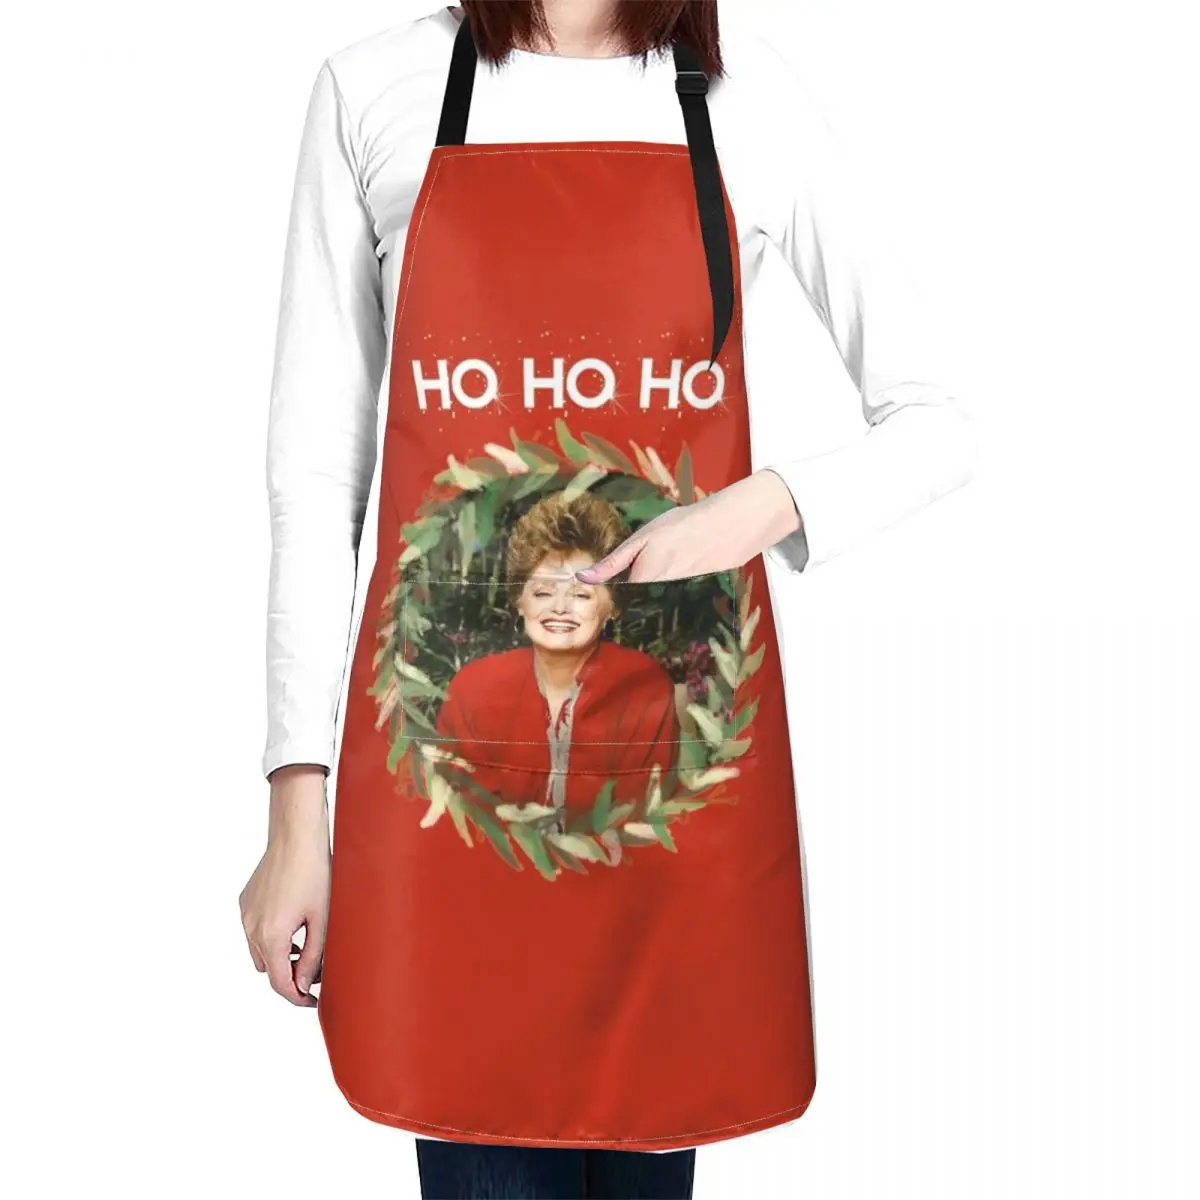 

HO HO HO - Blanche Devereaux Christmas from the Golden Girls (White) Apron Kitchen Tools Barber Kitchen Aprons Woman